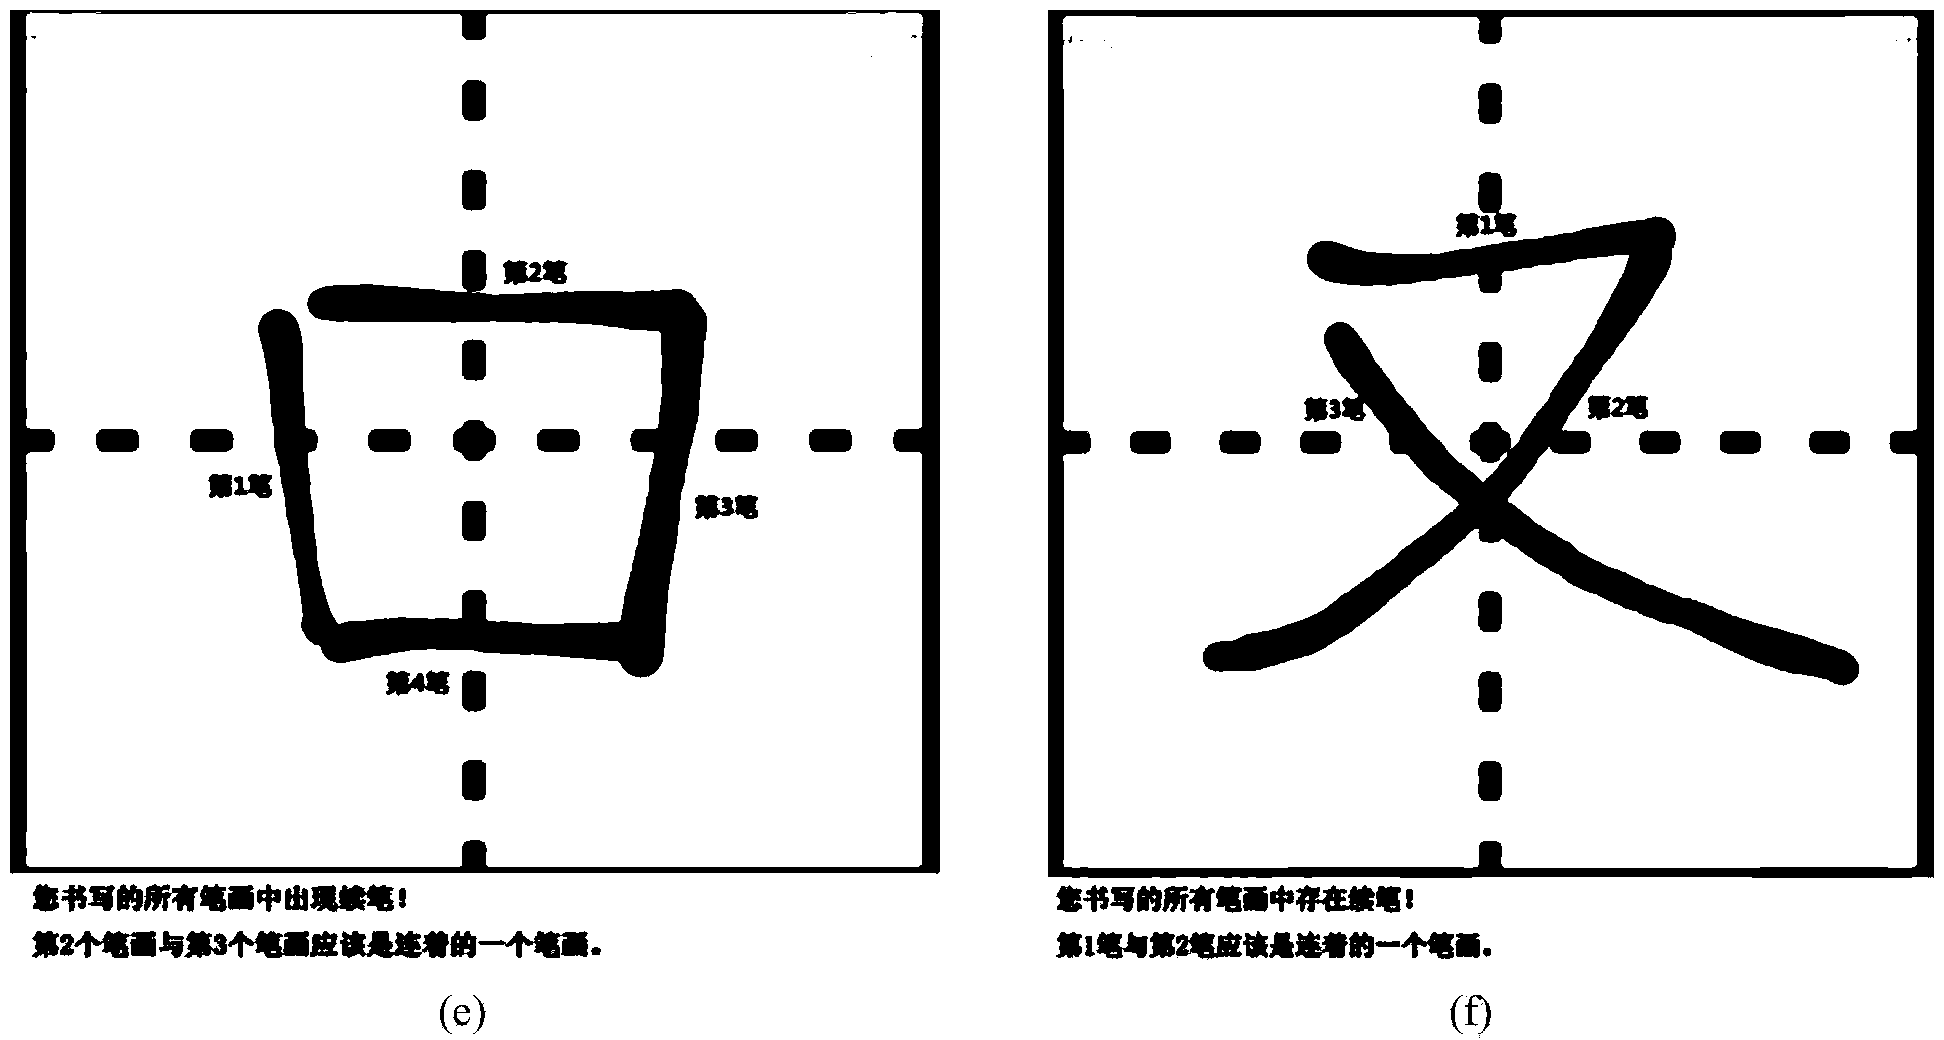 Stroke addition recognition method for online handwritten Chinese characters